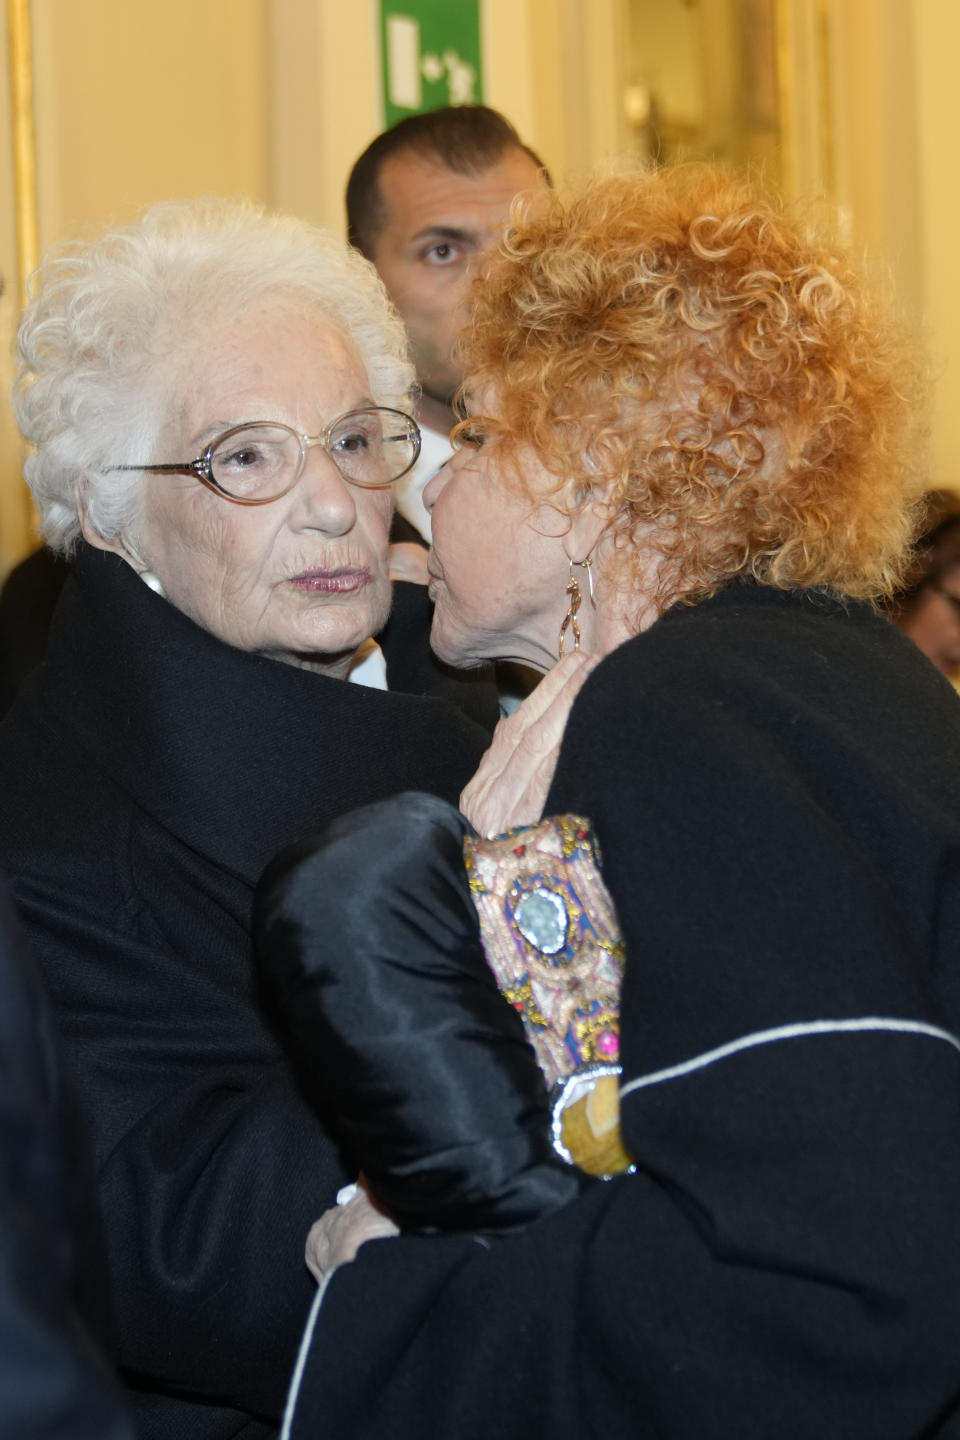 Italian Senator Liliana Segre, left, is greeted by Italian singer Ornella Vanoni as she arrives to attend La Scala opera house's gala season opener, Giuseppe Verdi's opera 'Don Carlo' at the Milan La Scala theater, Italy, Thursday Dec. 7, 2023. The season-opener Thursday, held each year on the Milan feast day St. Ambrose, is considered one of the highlights of the European cultural calendar. (AP Photo/Luca Bruno)